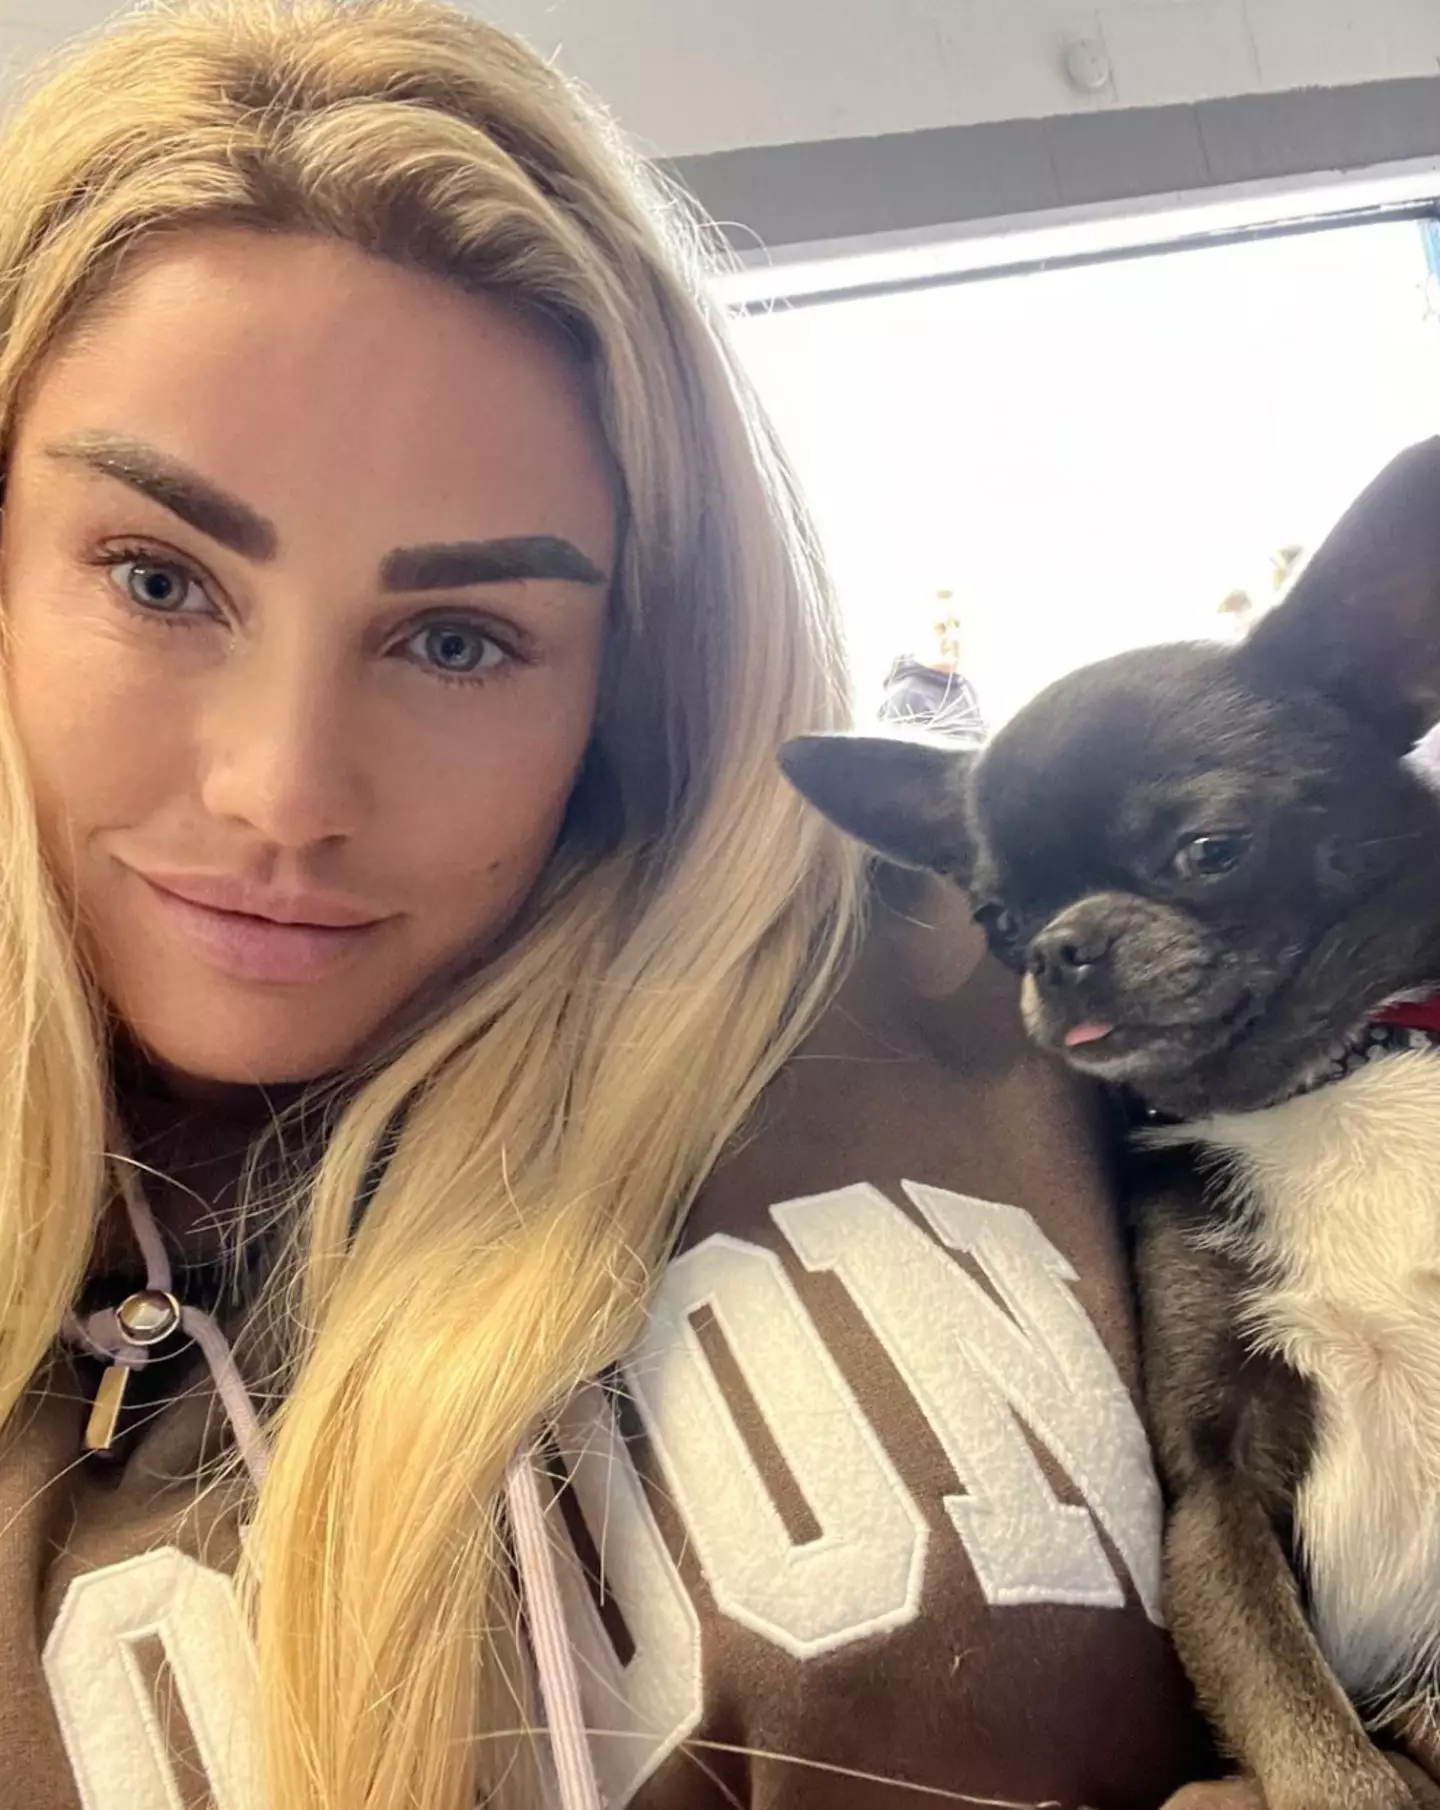 Katie Price announced the tragic news on Instagram this afternoon.